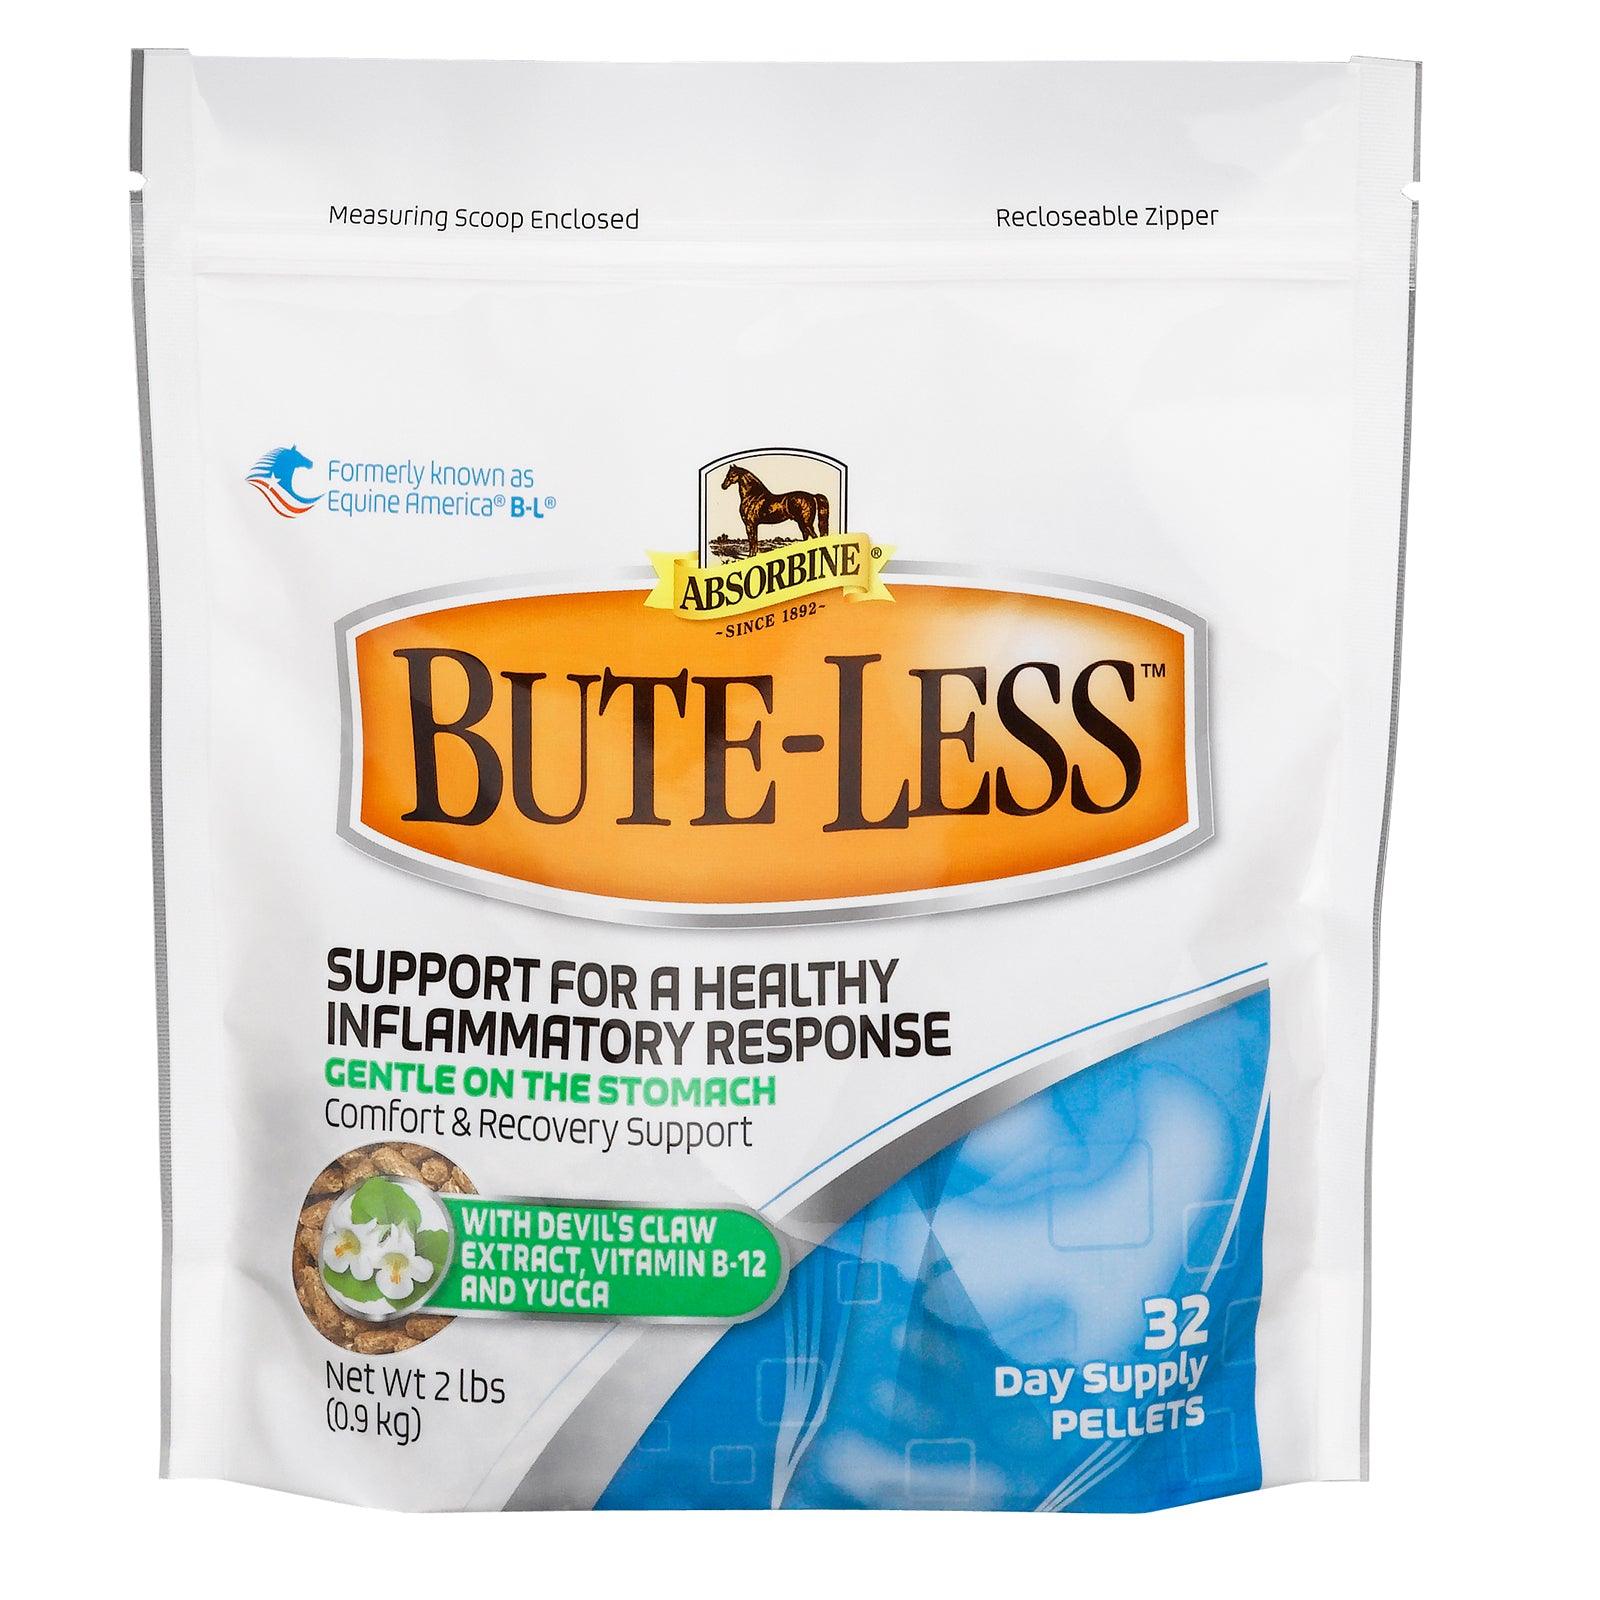 Bute-less supplement, support for a healthy inflammatory response 2 lb. bag. 32 day supply of pellets.